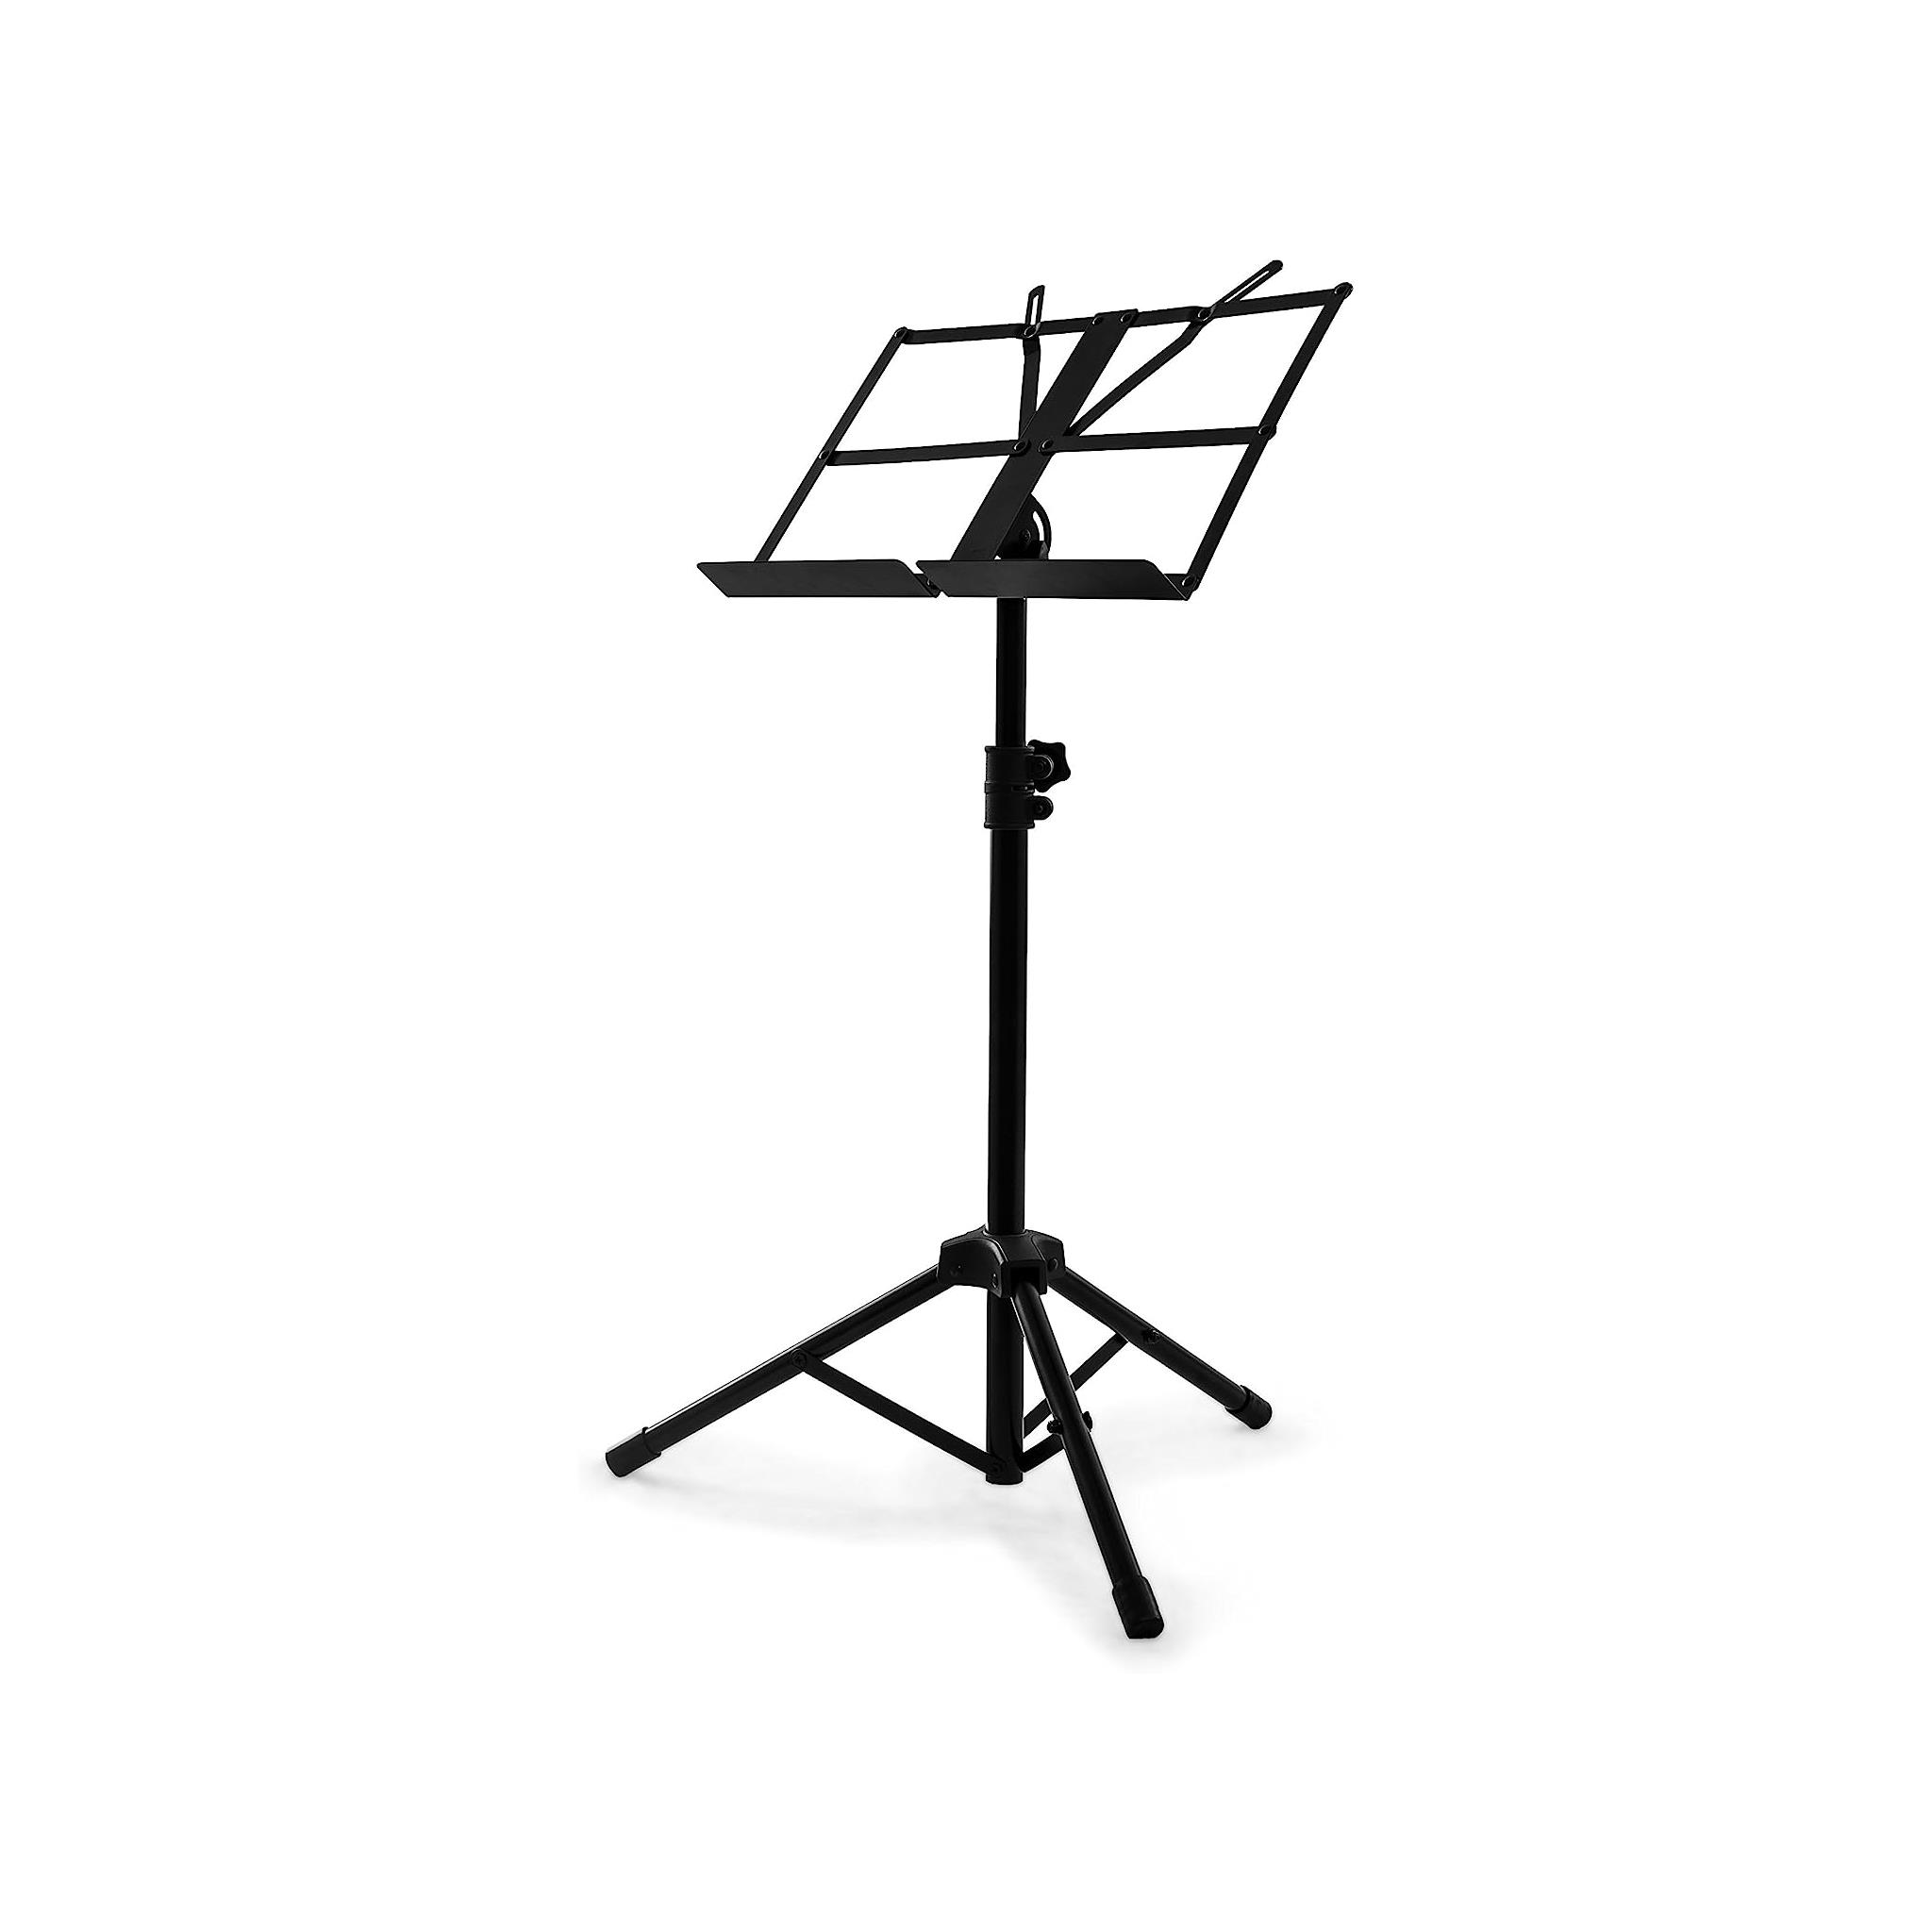 Nomad Stands Open Folding Desk Music Stand